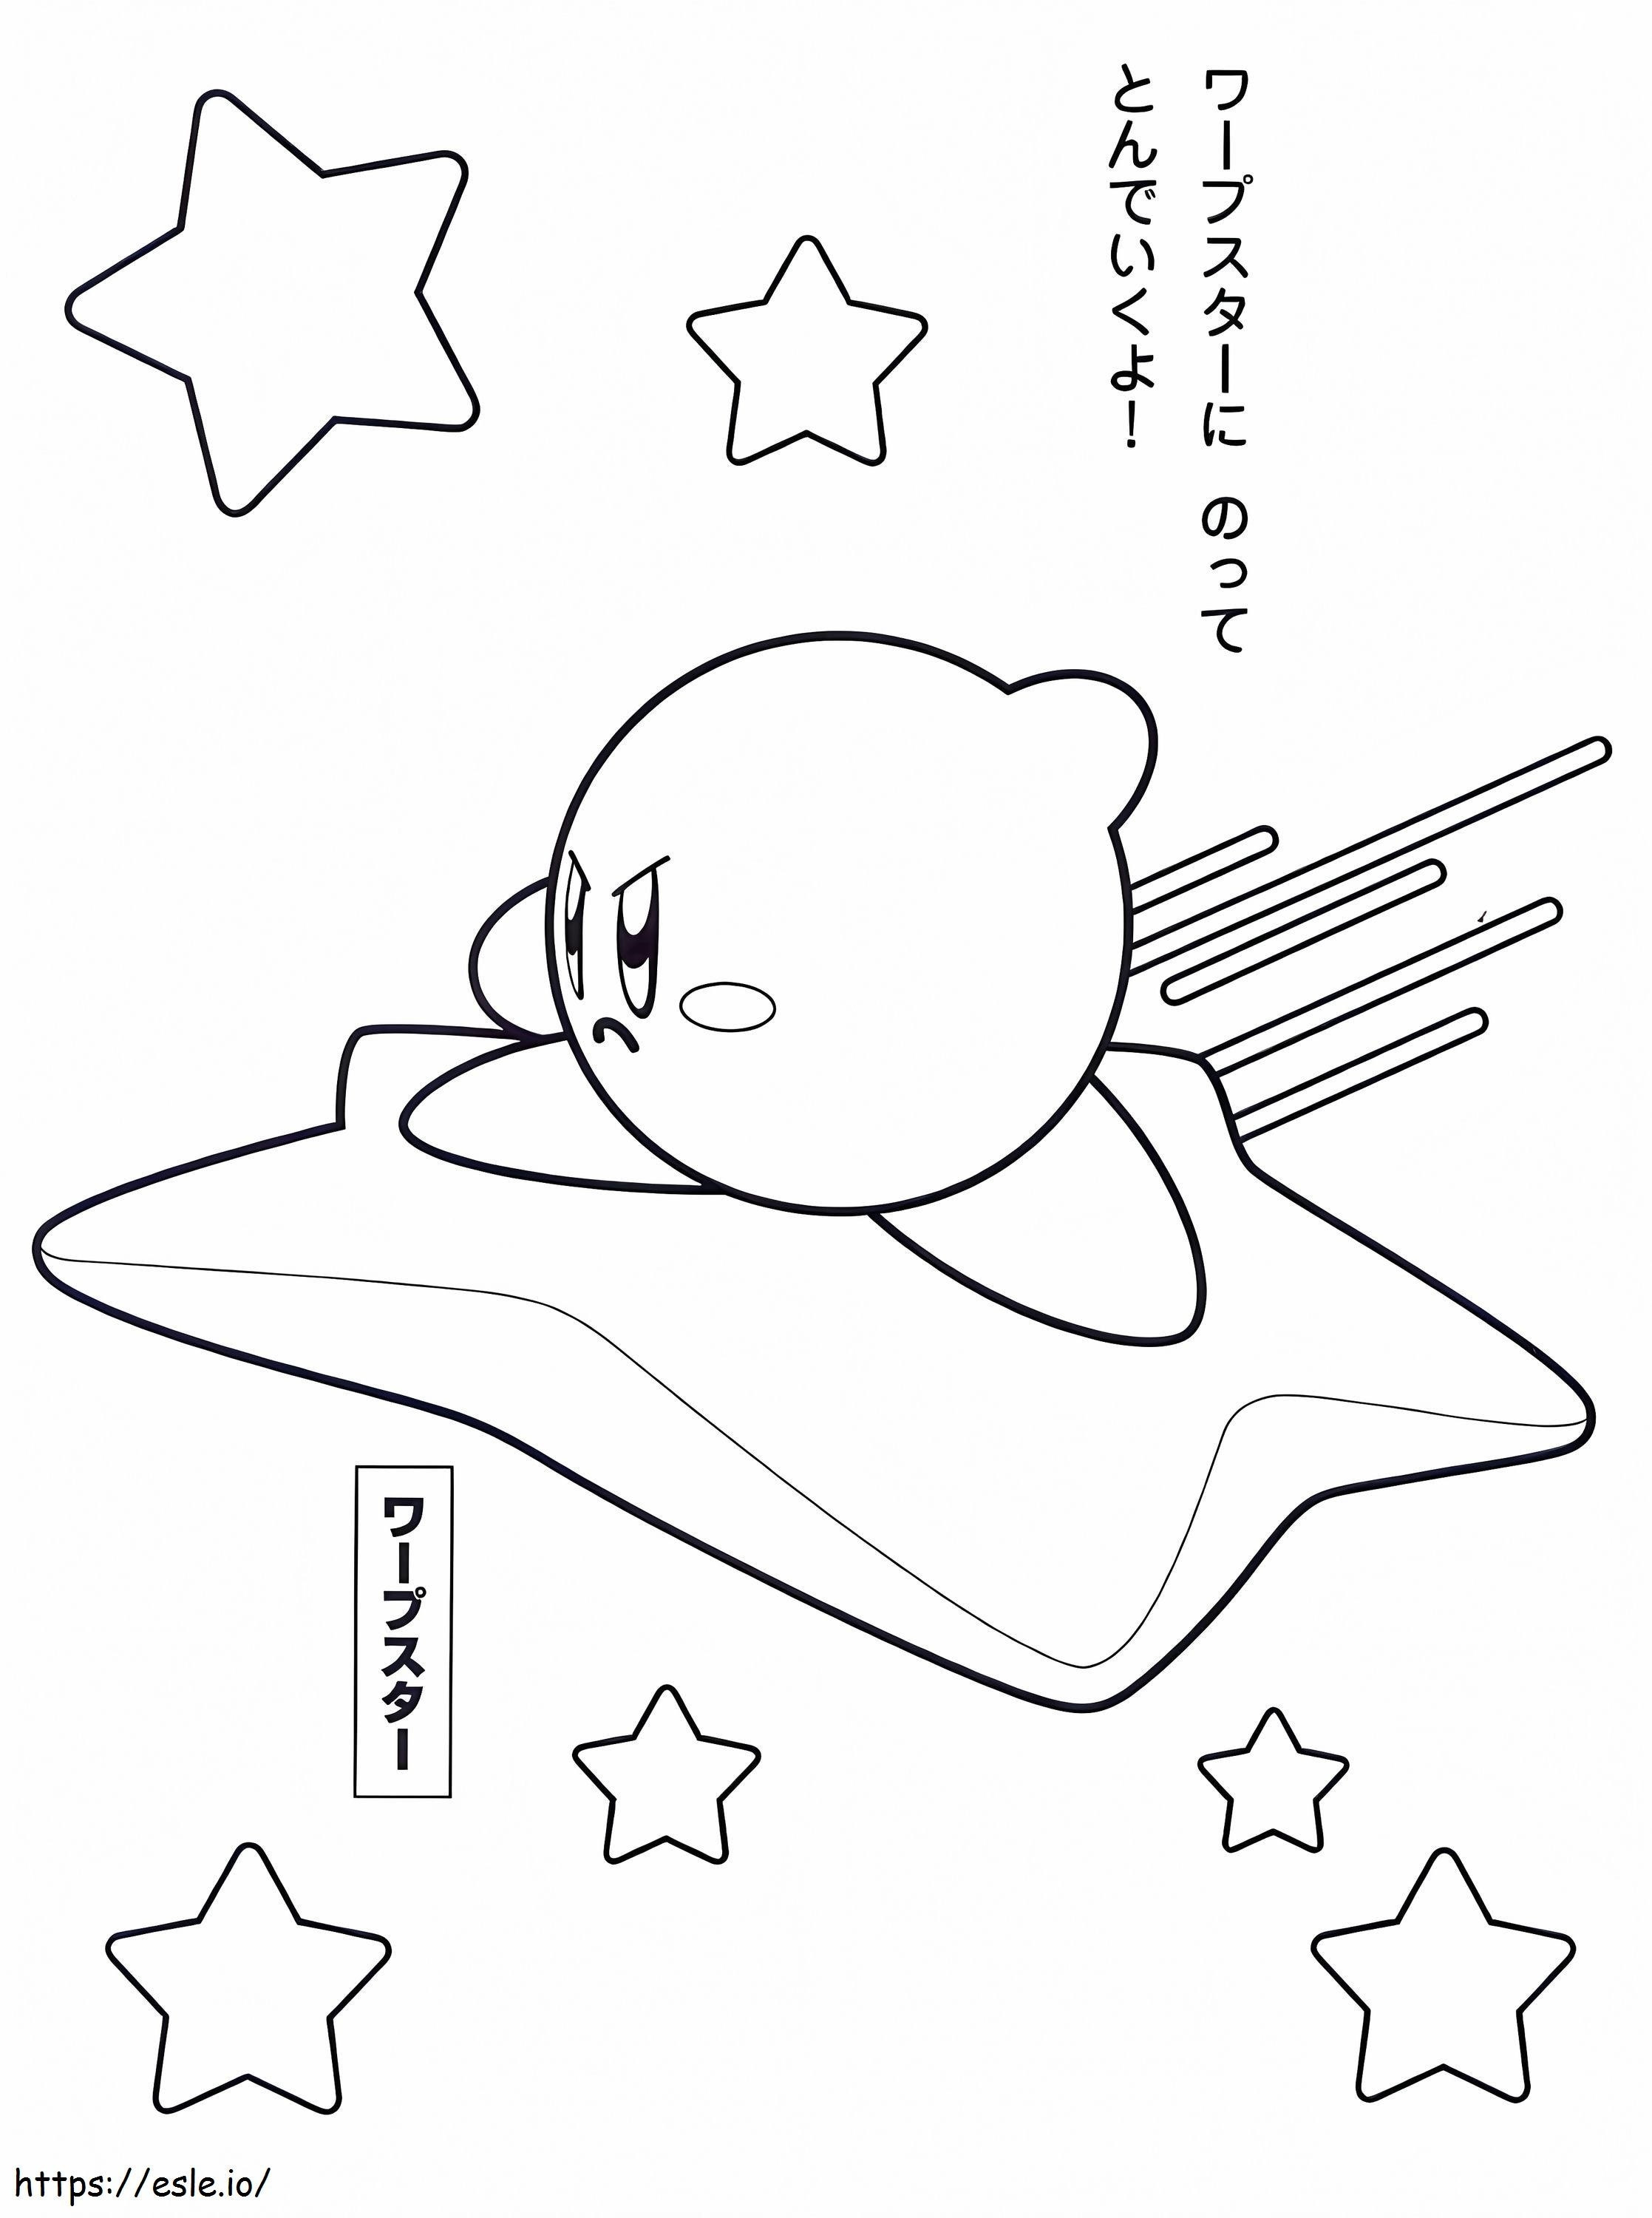 Kirby Vole coloring page